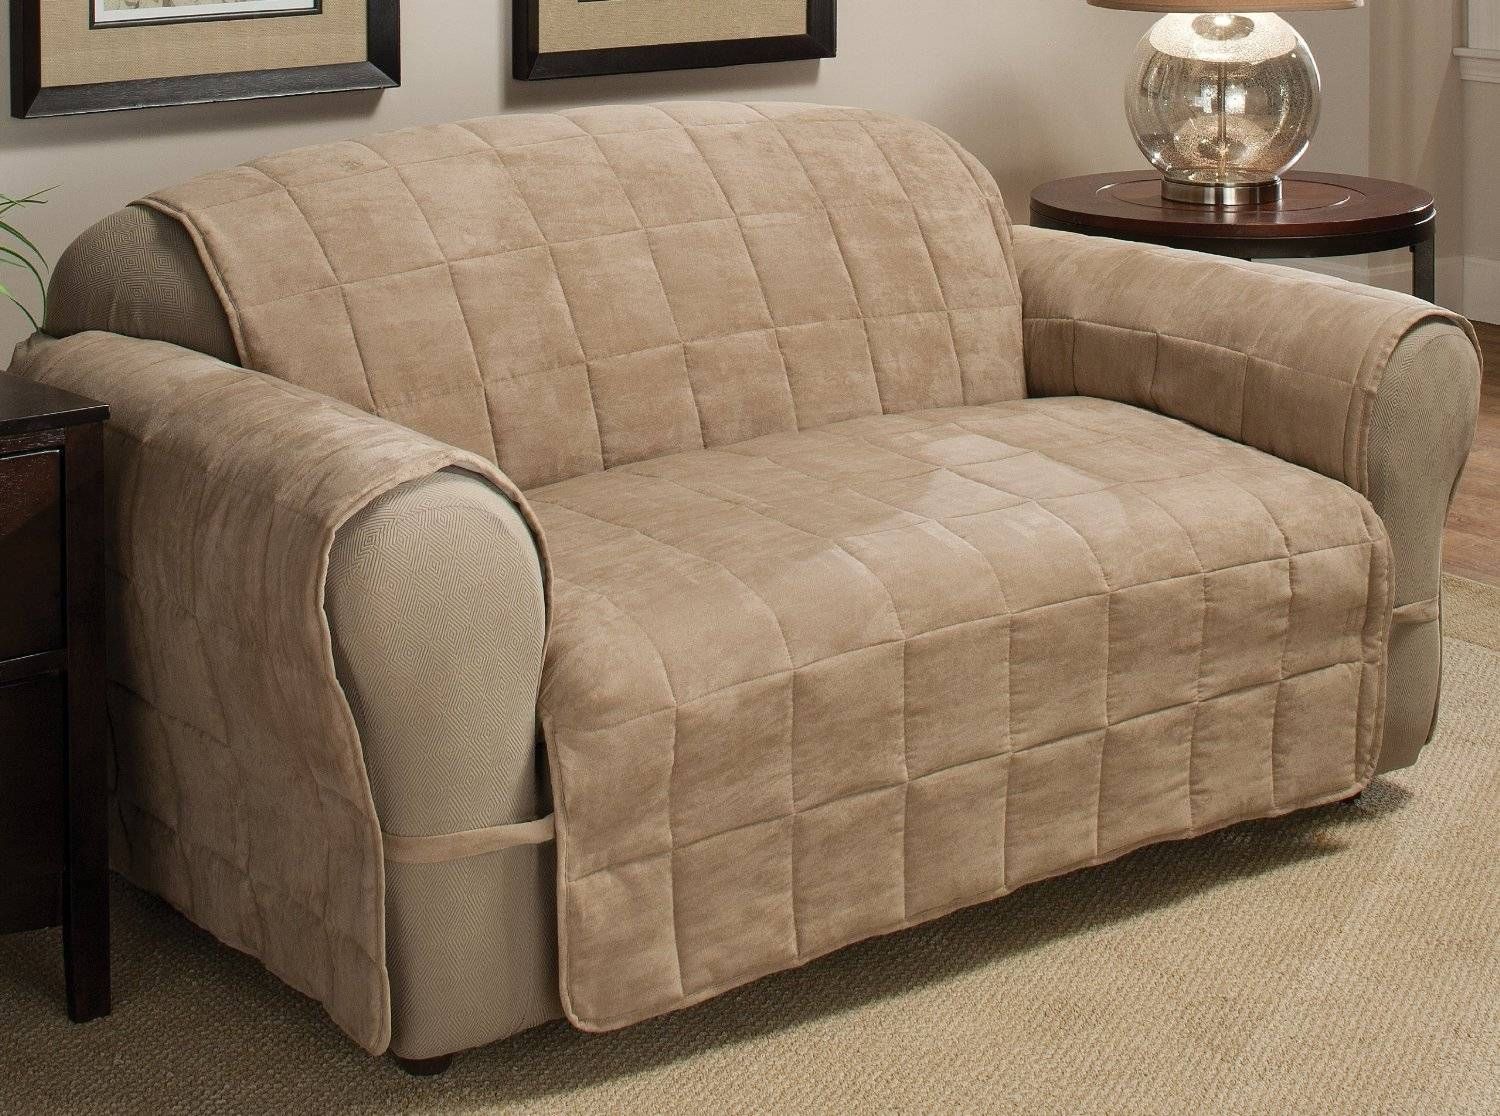 Decor: Breathtaking Target Slipcovers For Chic Home Furniture Pertaining To Sofa And Chair Slipcovers (View 2 of 15)